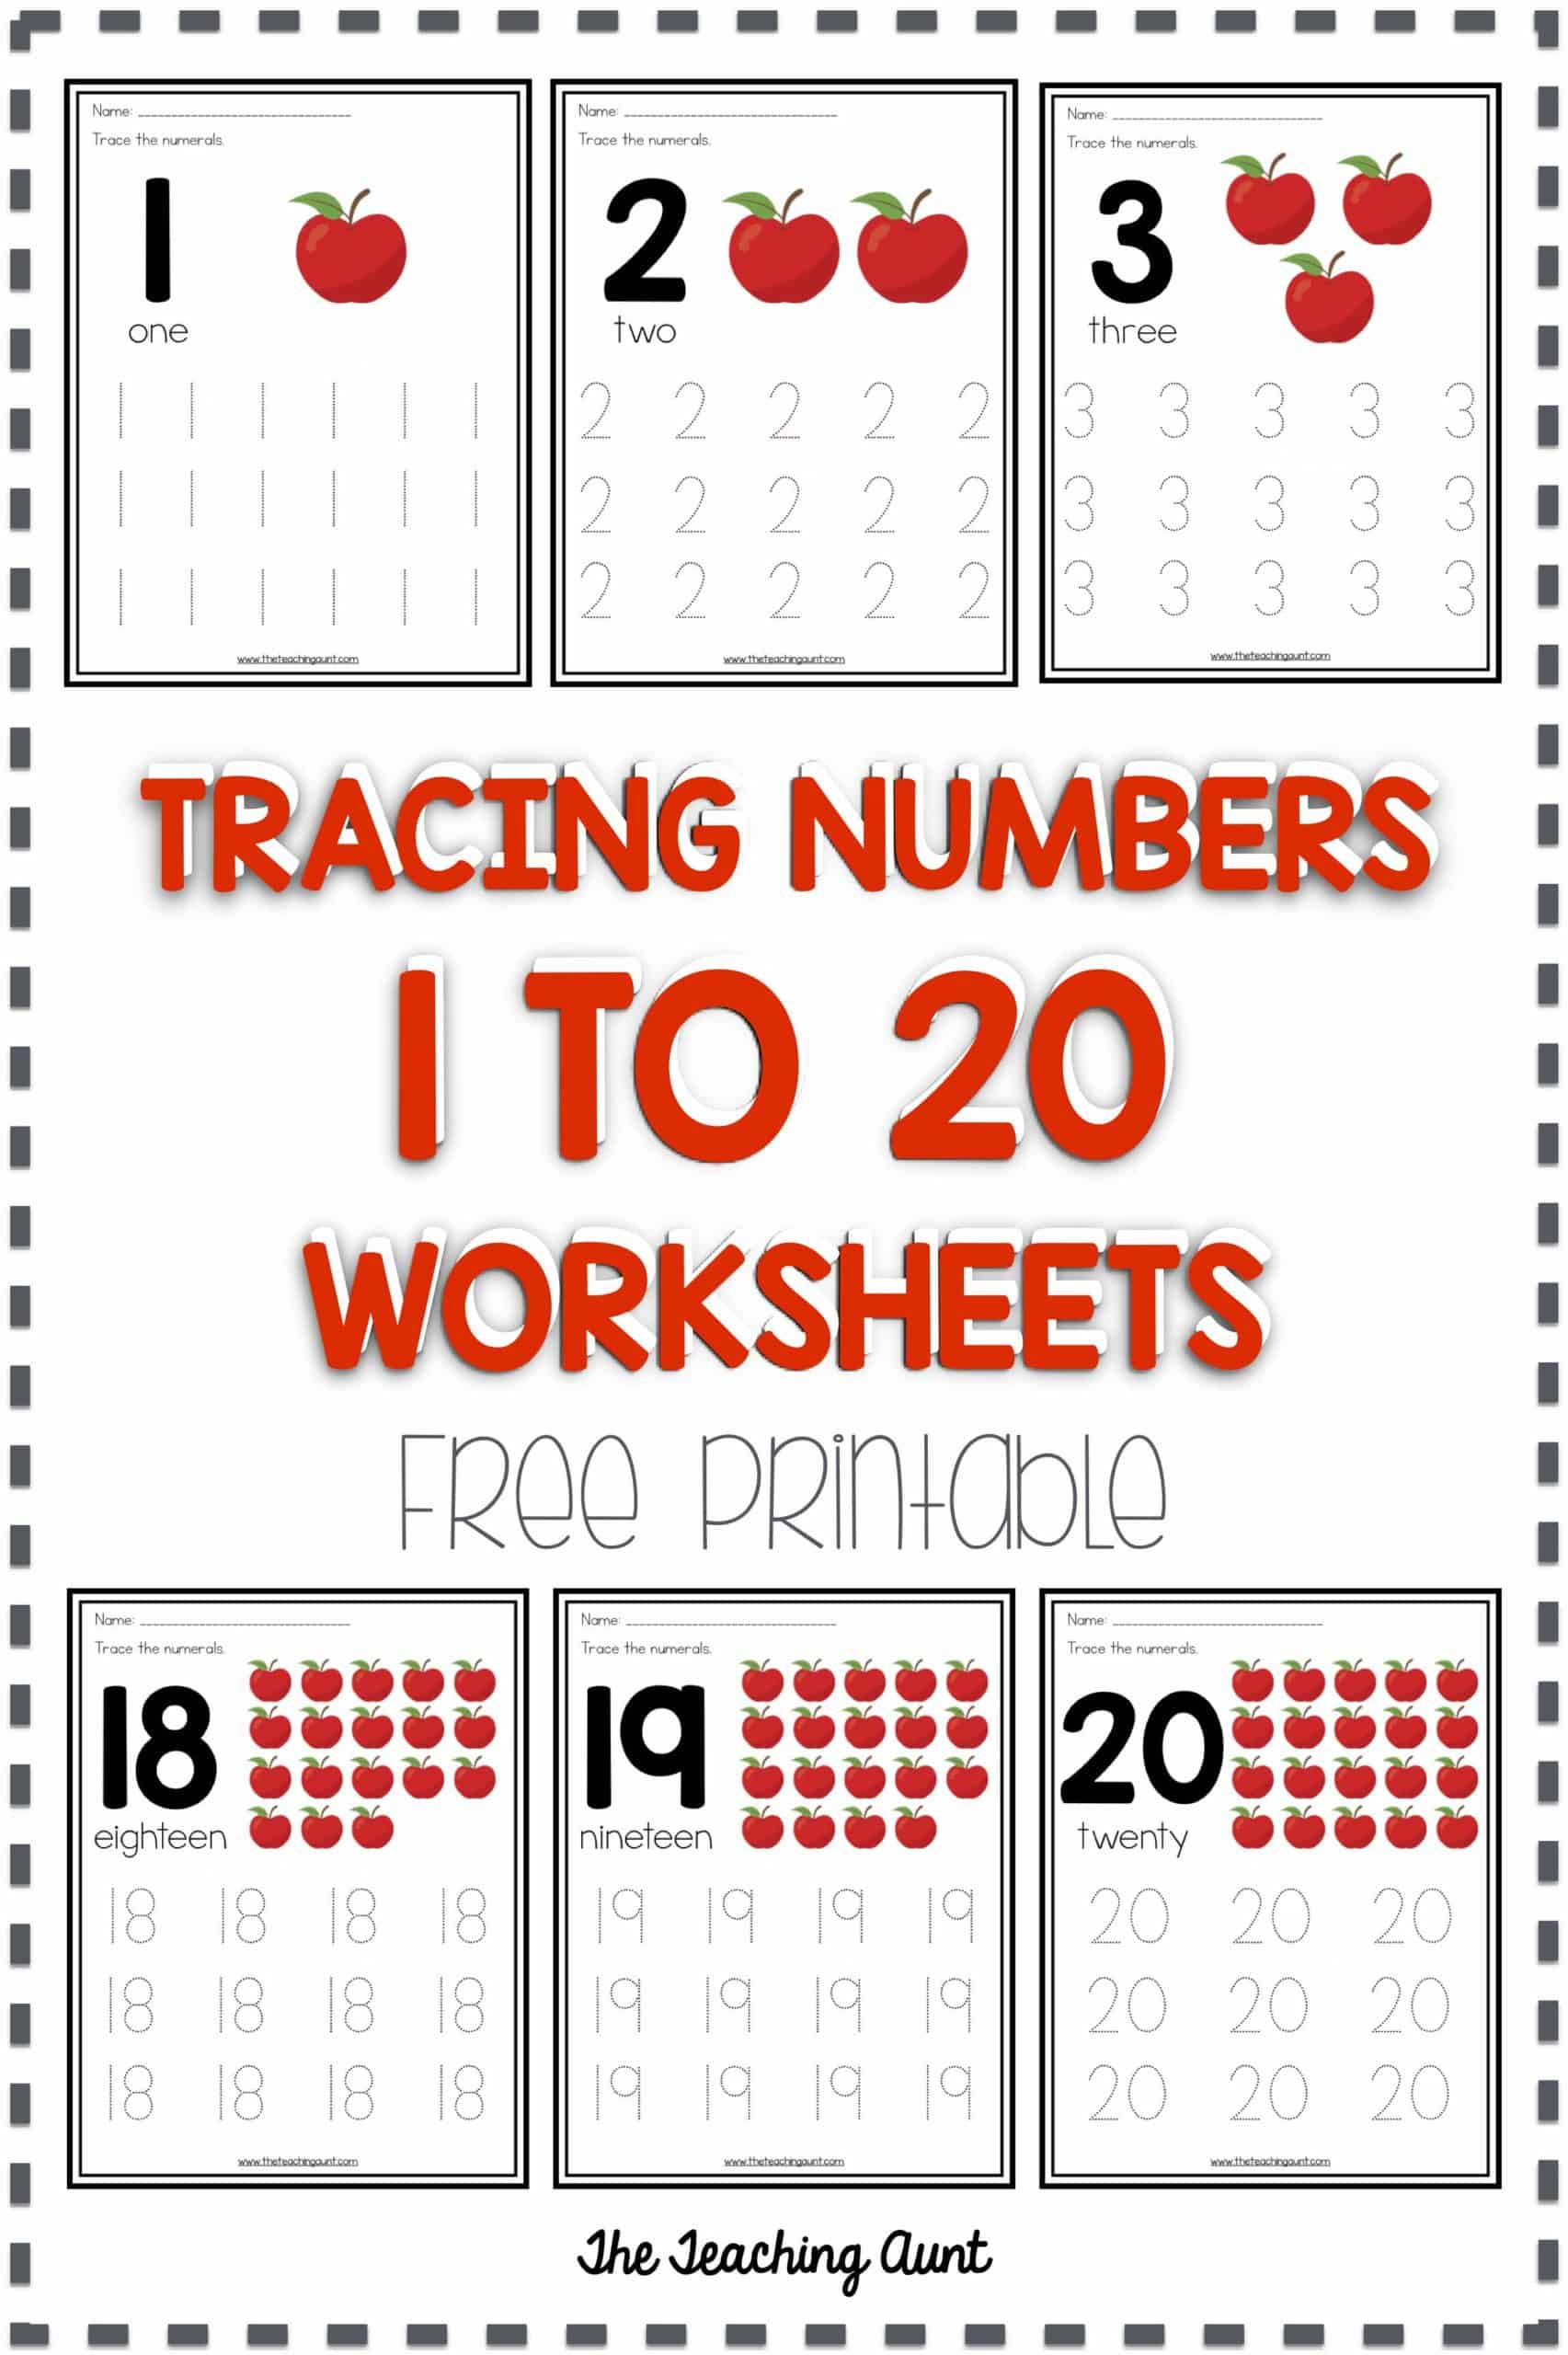 Free Writing Numbers 1 to 20 Worksheets